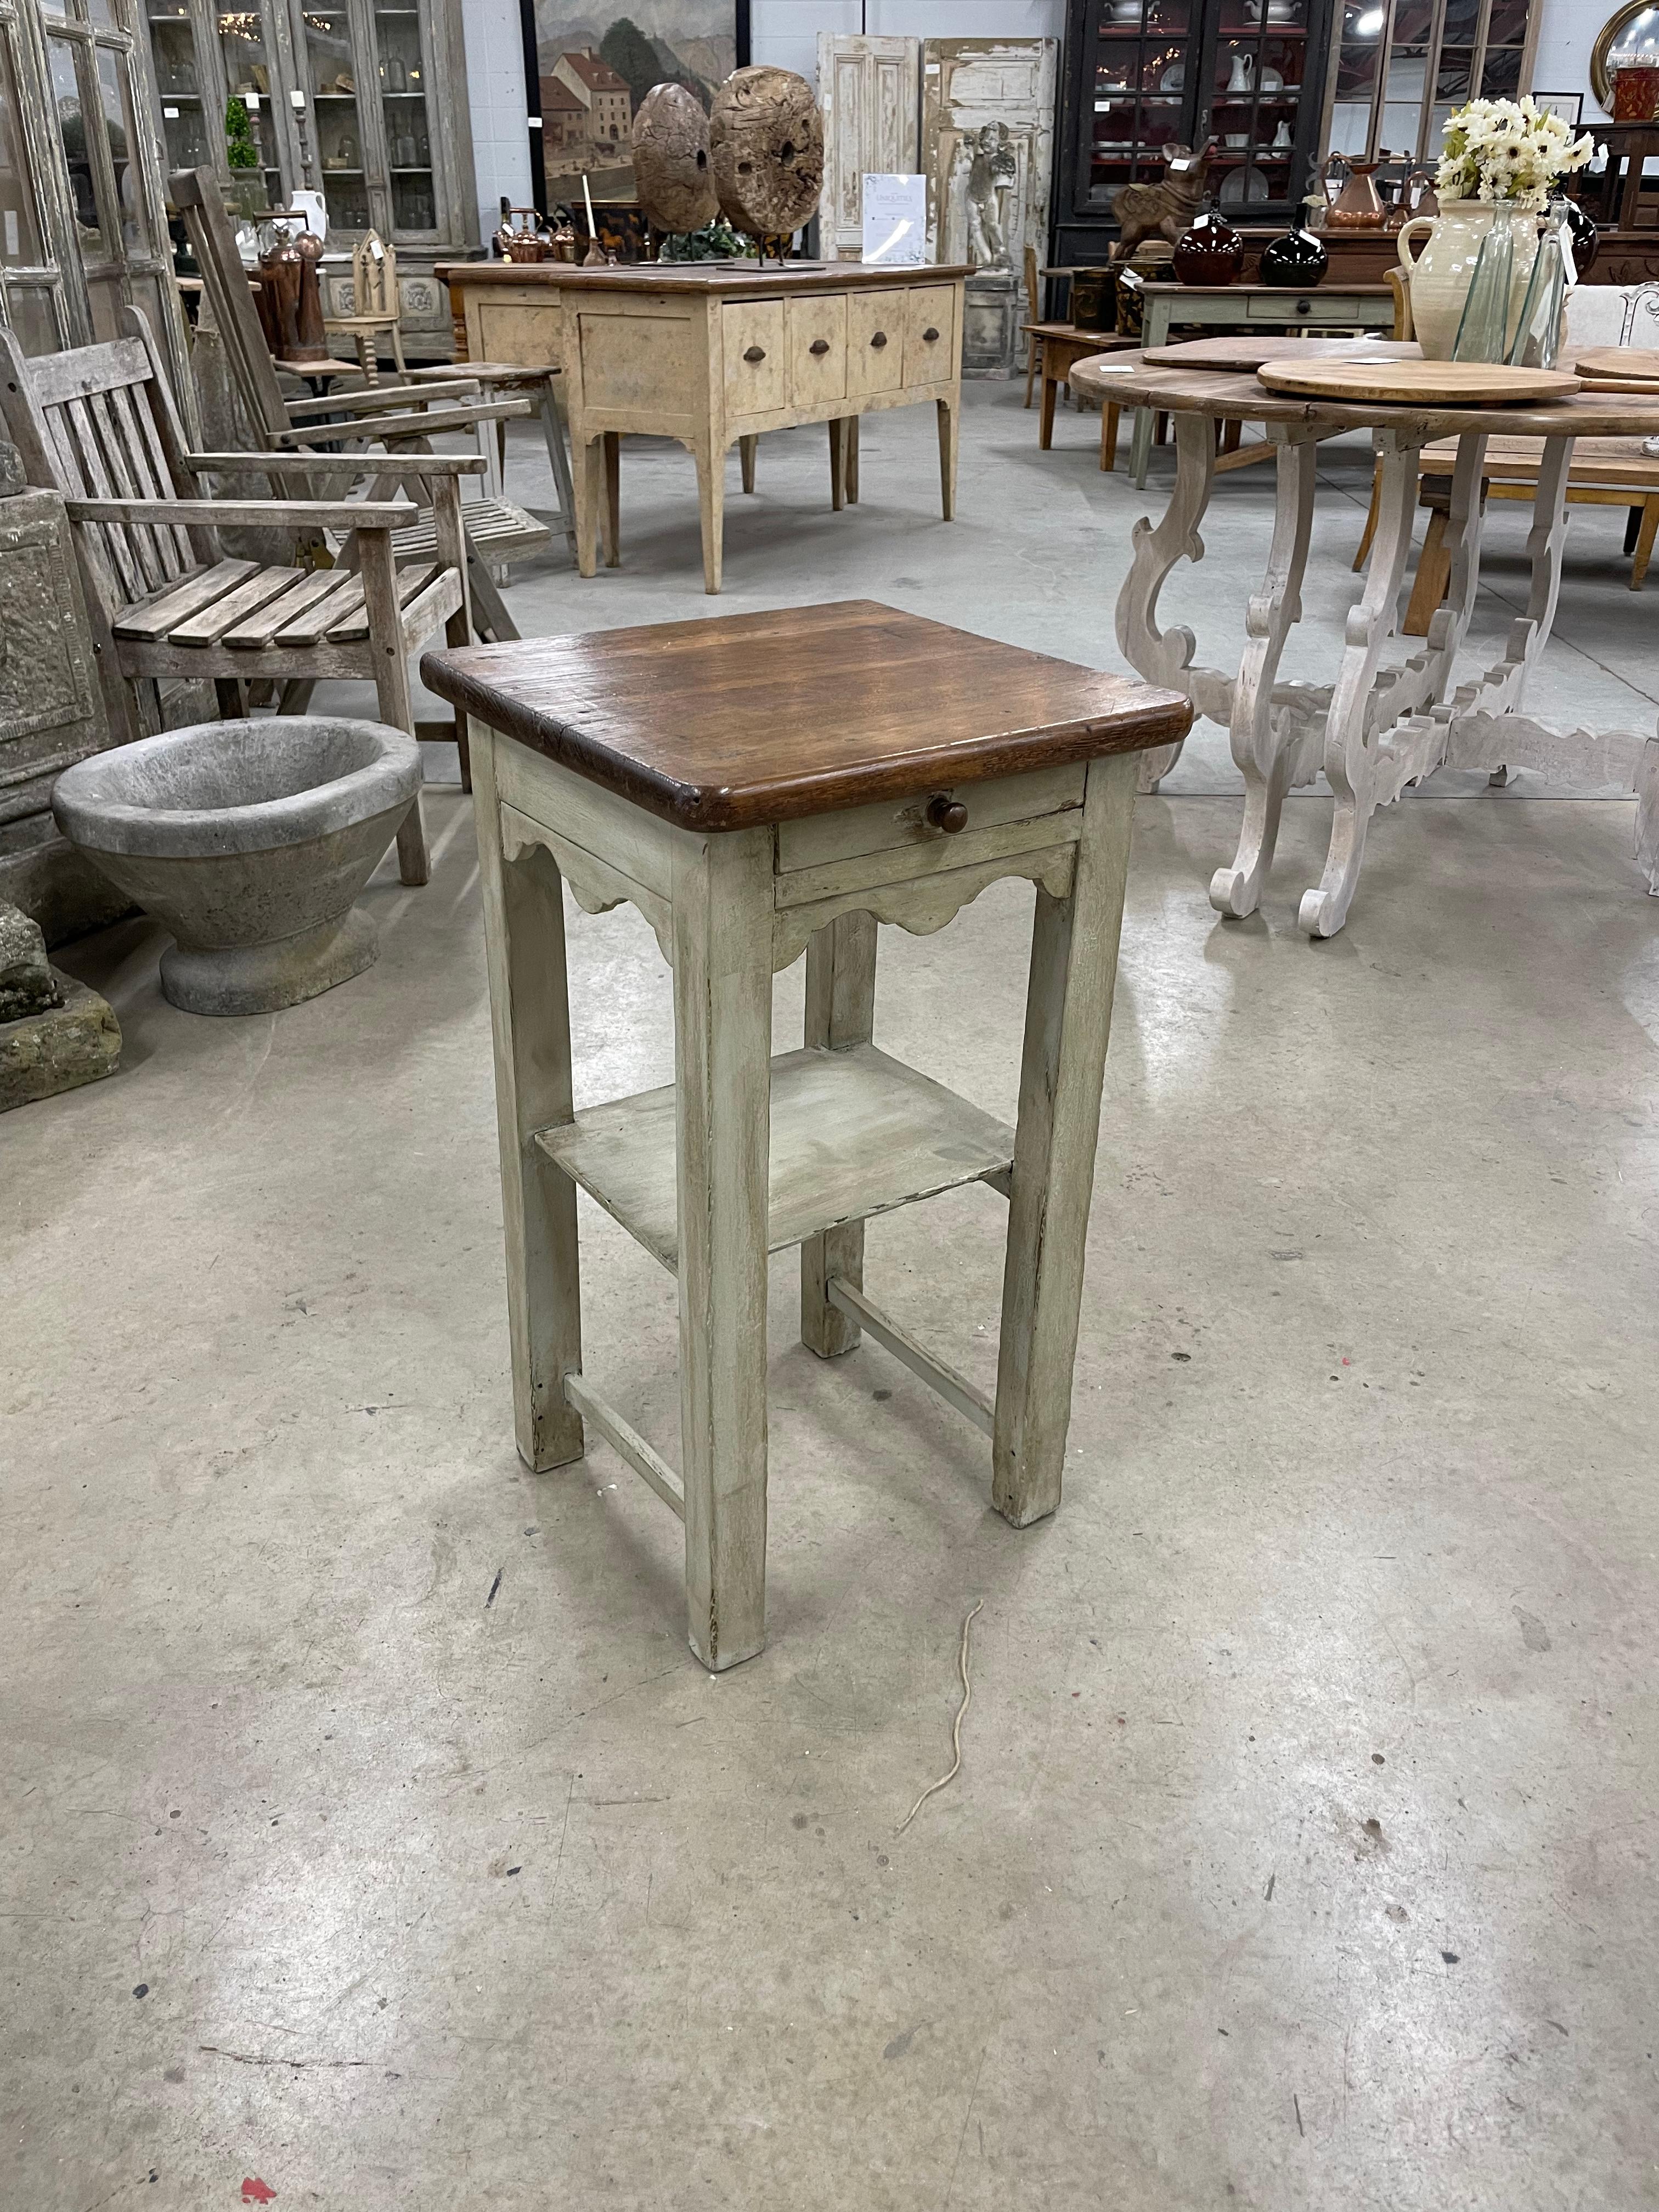 Antique Restauration period single drawer,, single ledge painted side table with scalloped skirt on 4 sides, It’s early construction made with dovetails and peg joints . 

This lovely old French farmhouse table was sourced in Burgundy, France. 